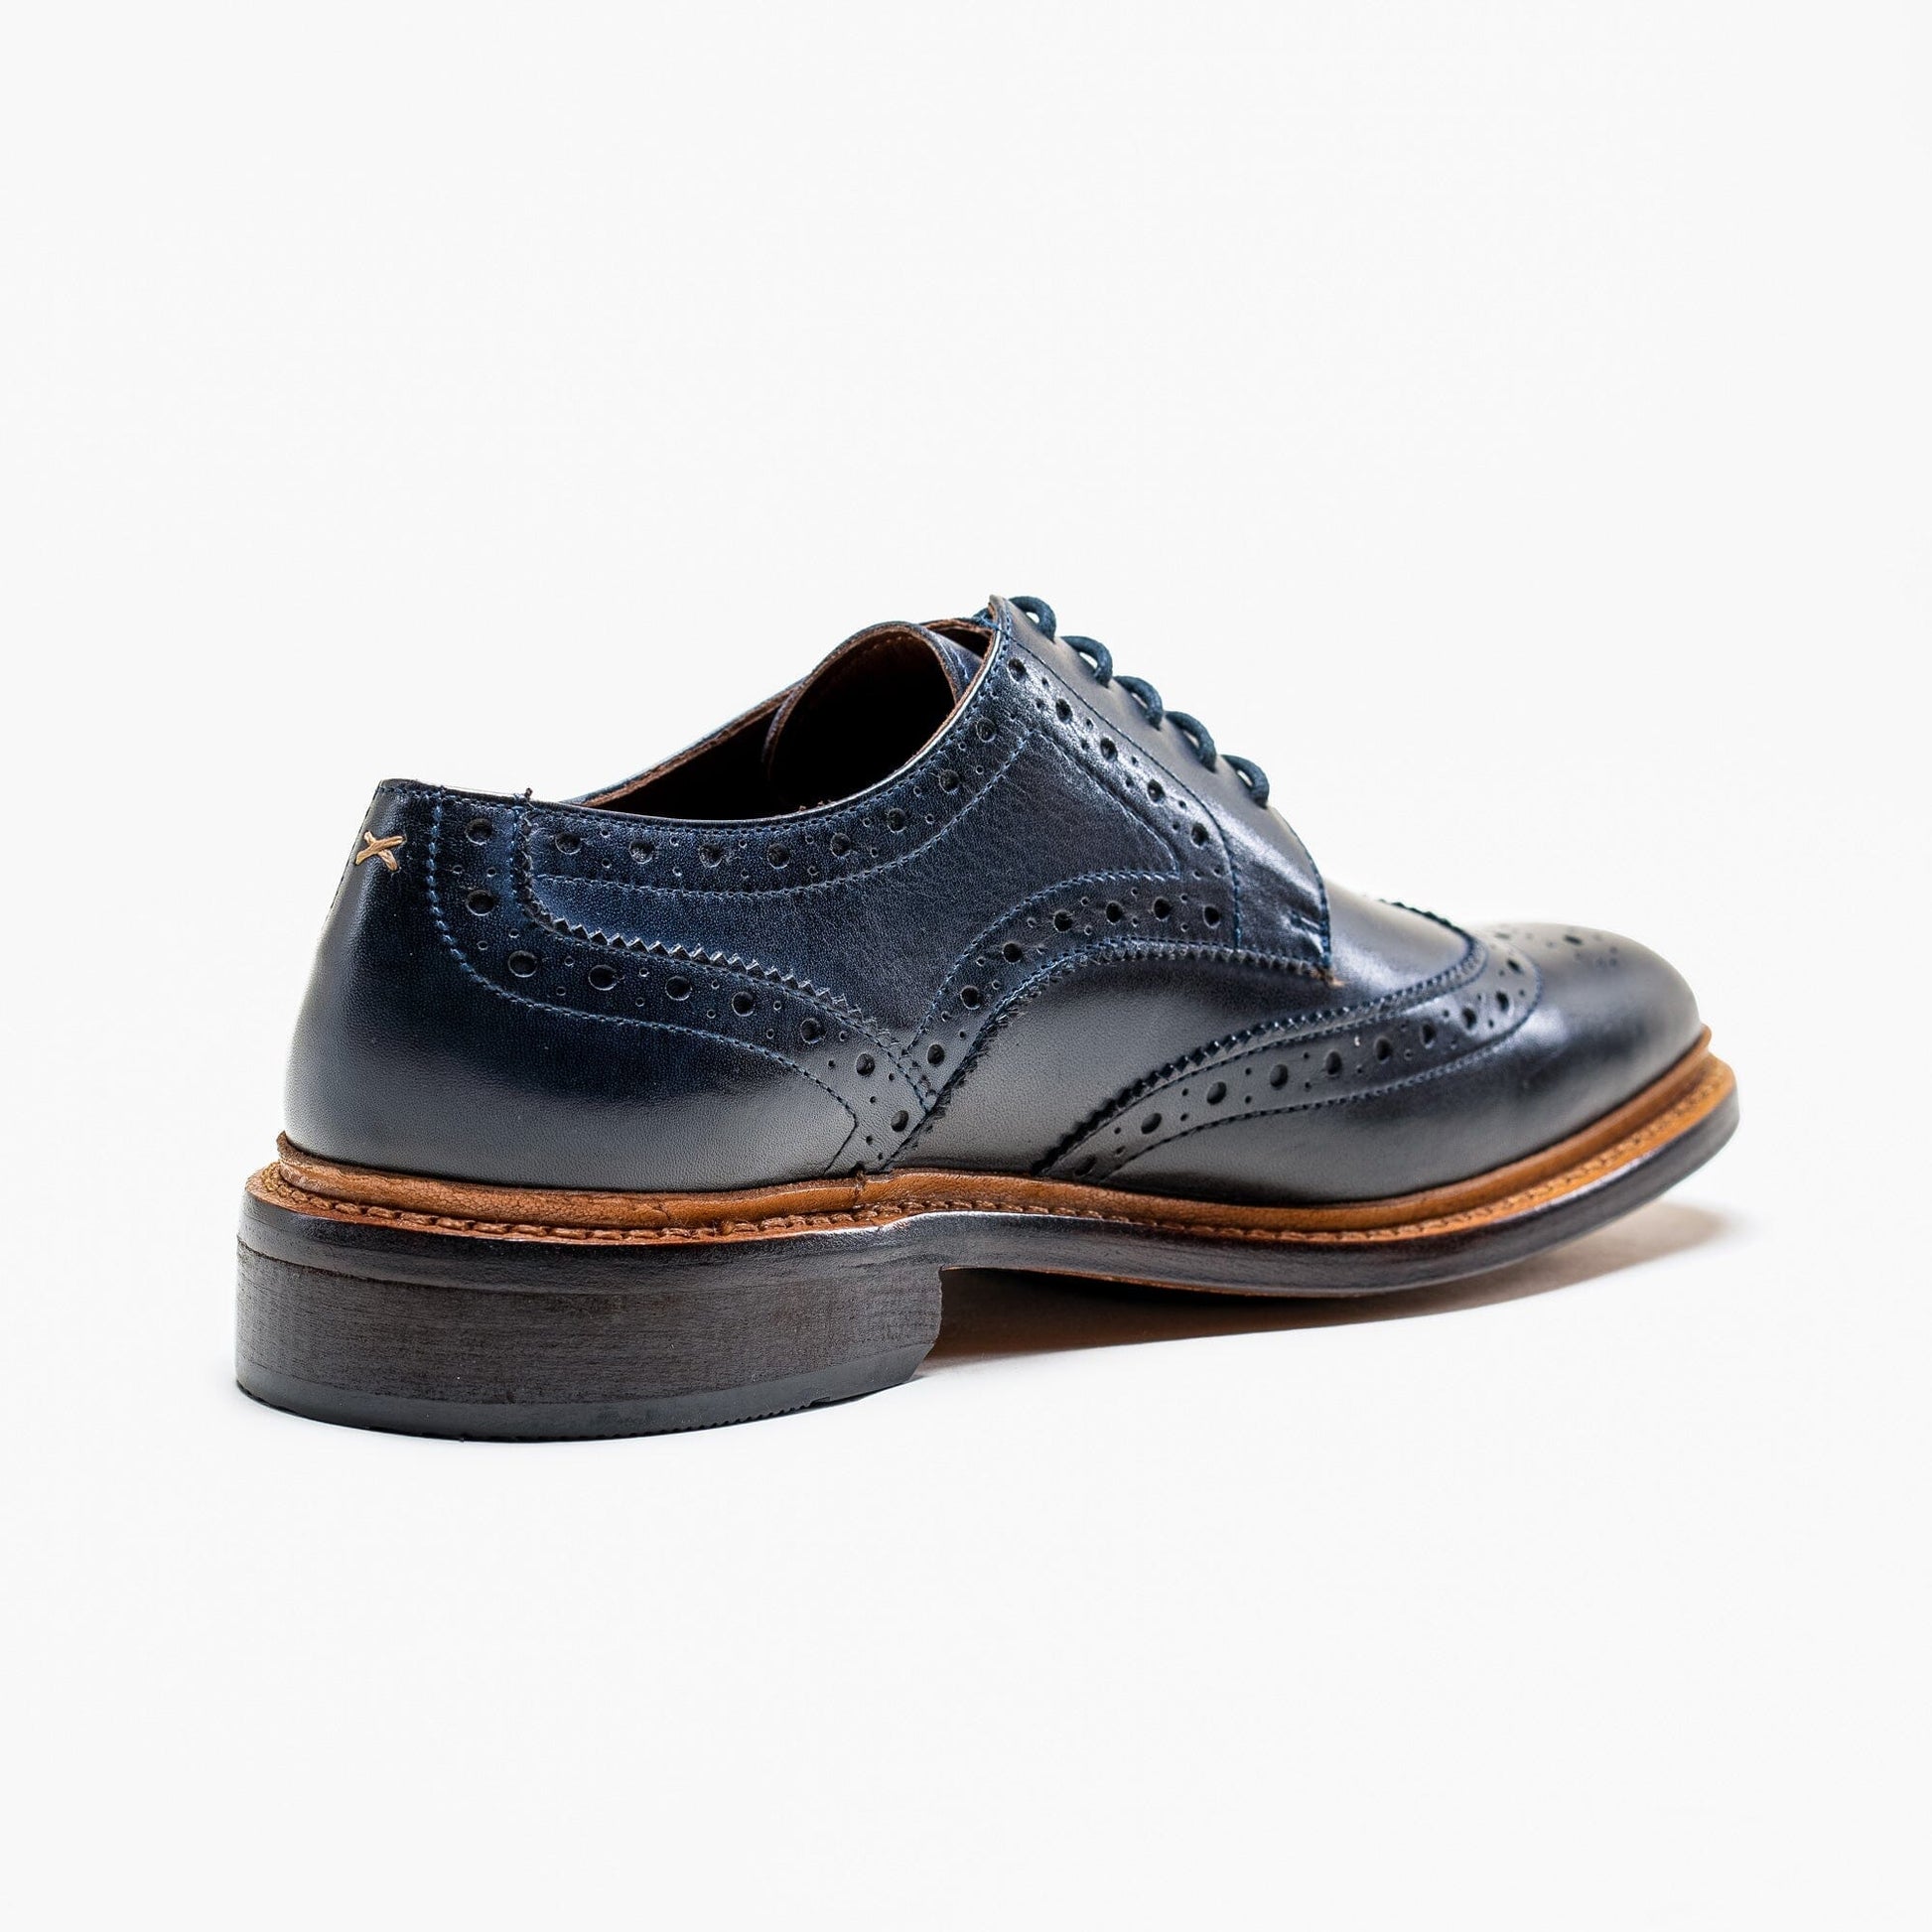 Navy Leather Brogue Shoes - STOCK CLEARANCE - Shoes Sale - 